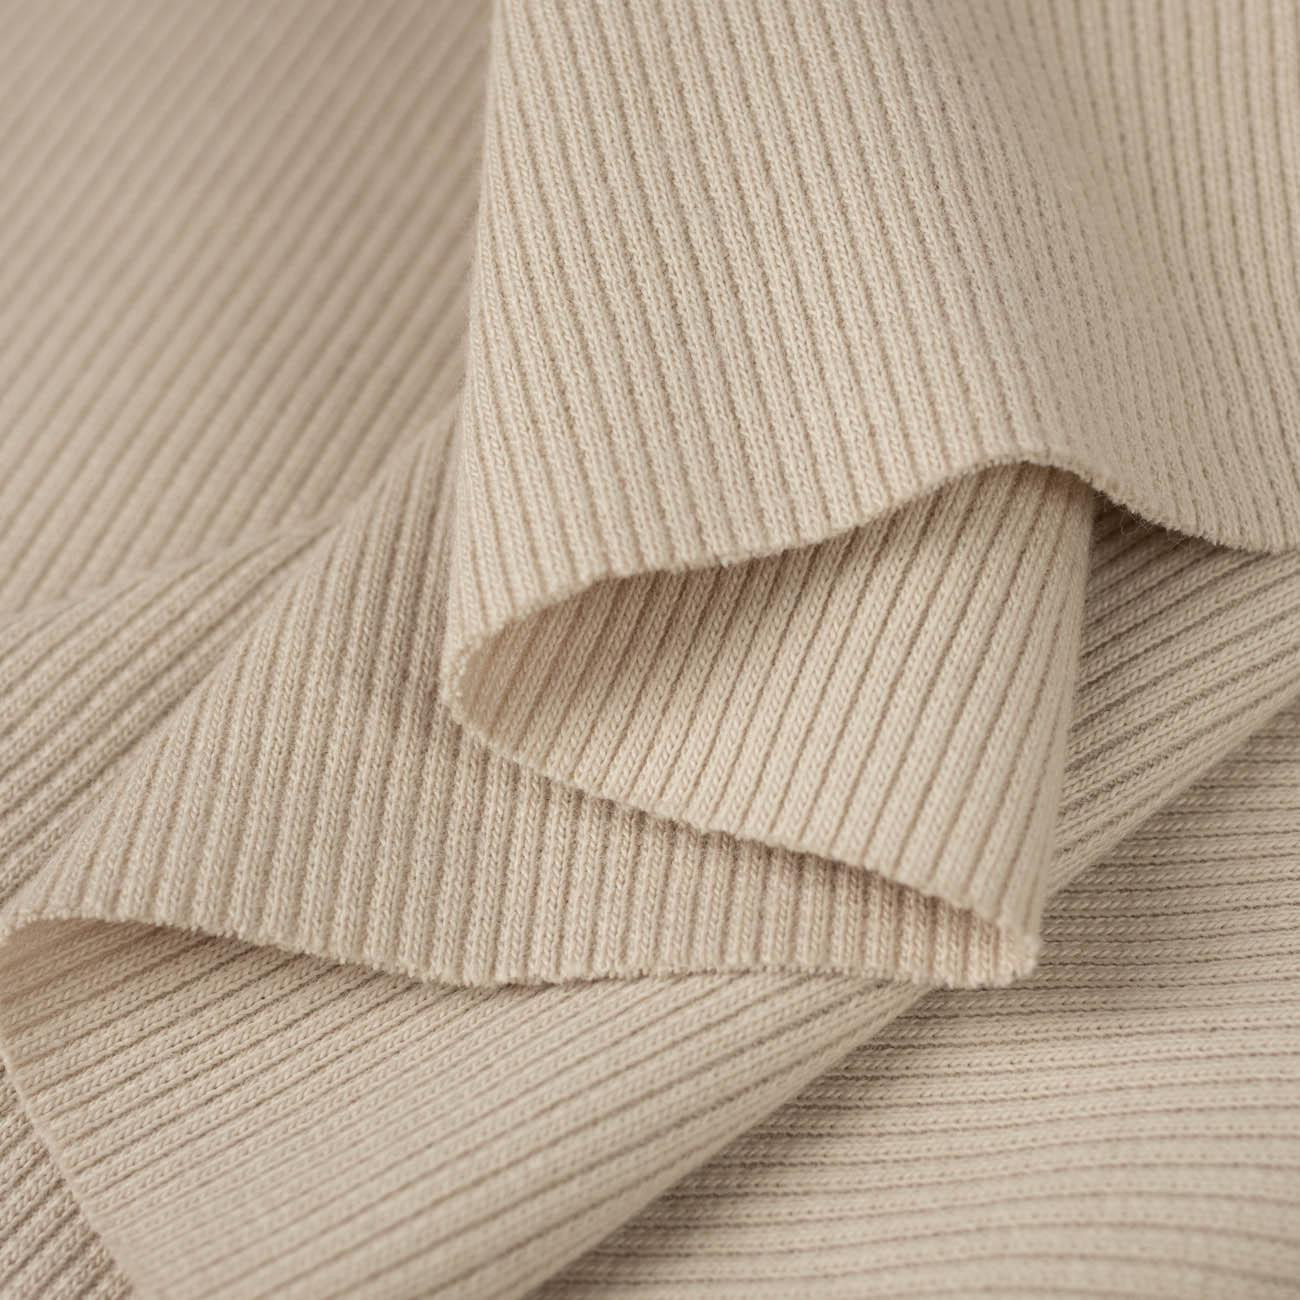 D-55 LIGHT BEIGE - Ribbed knit fabric